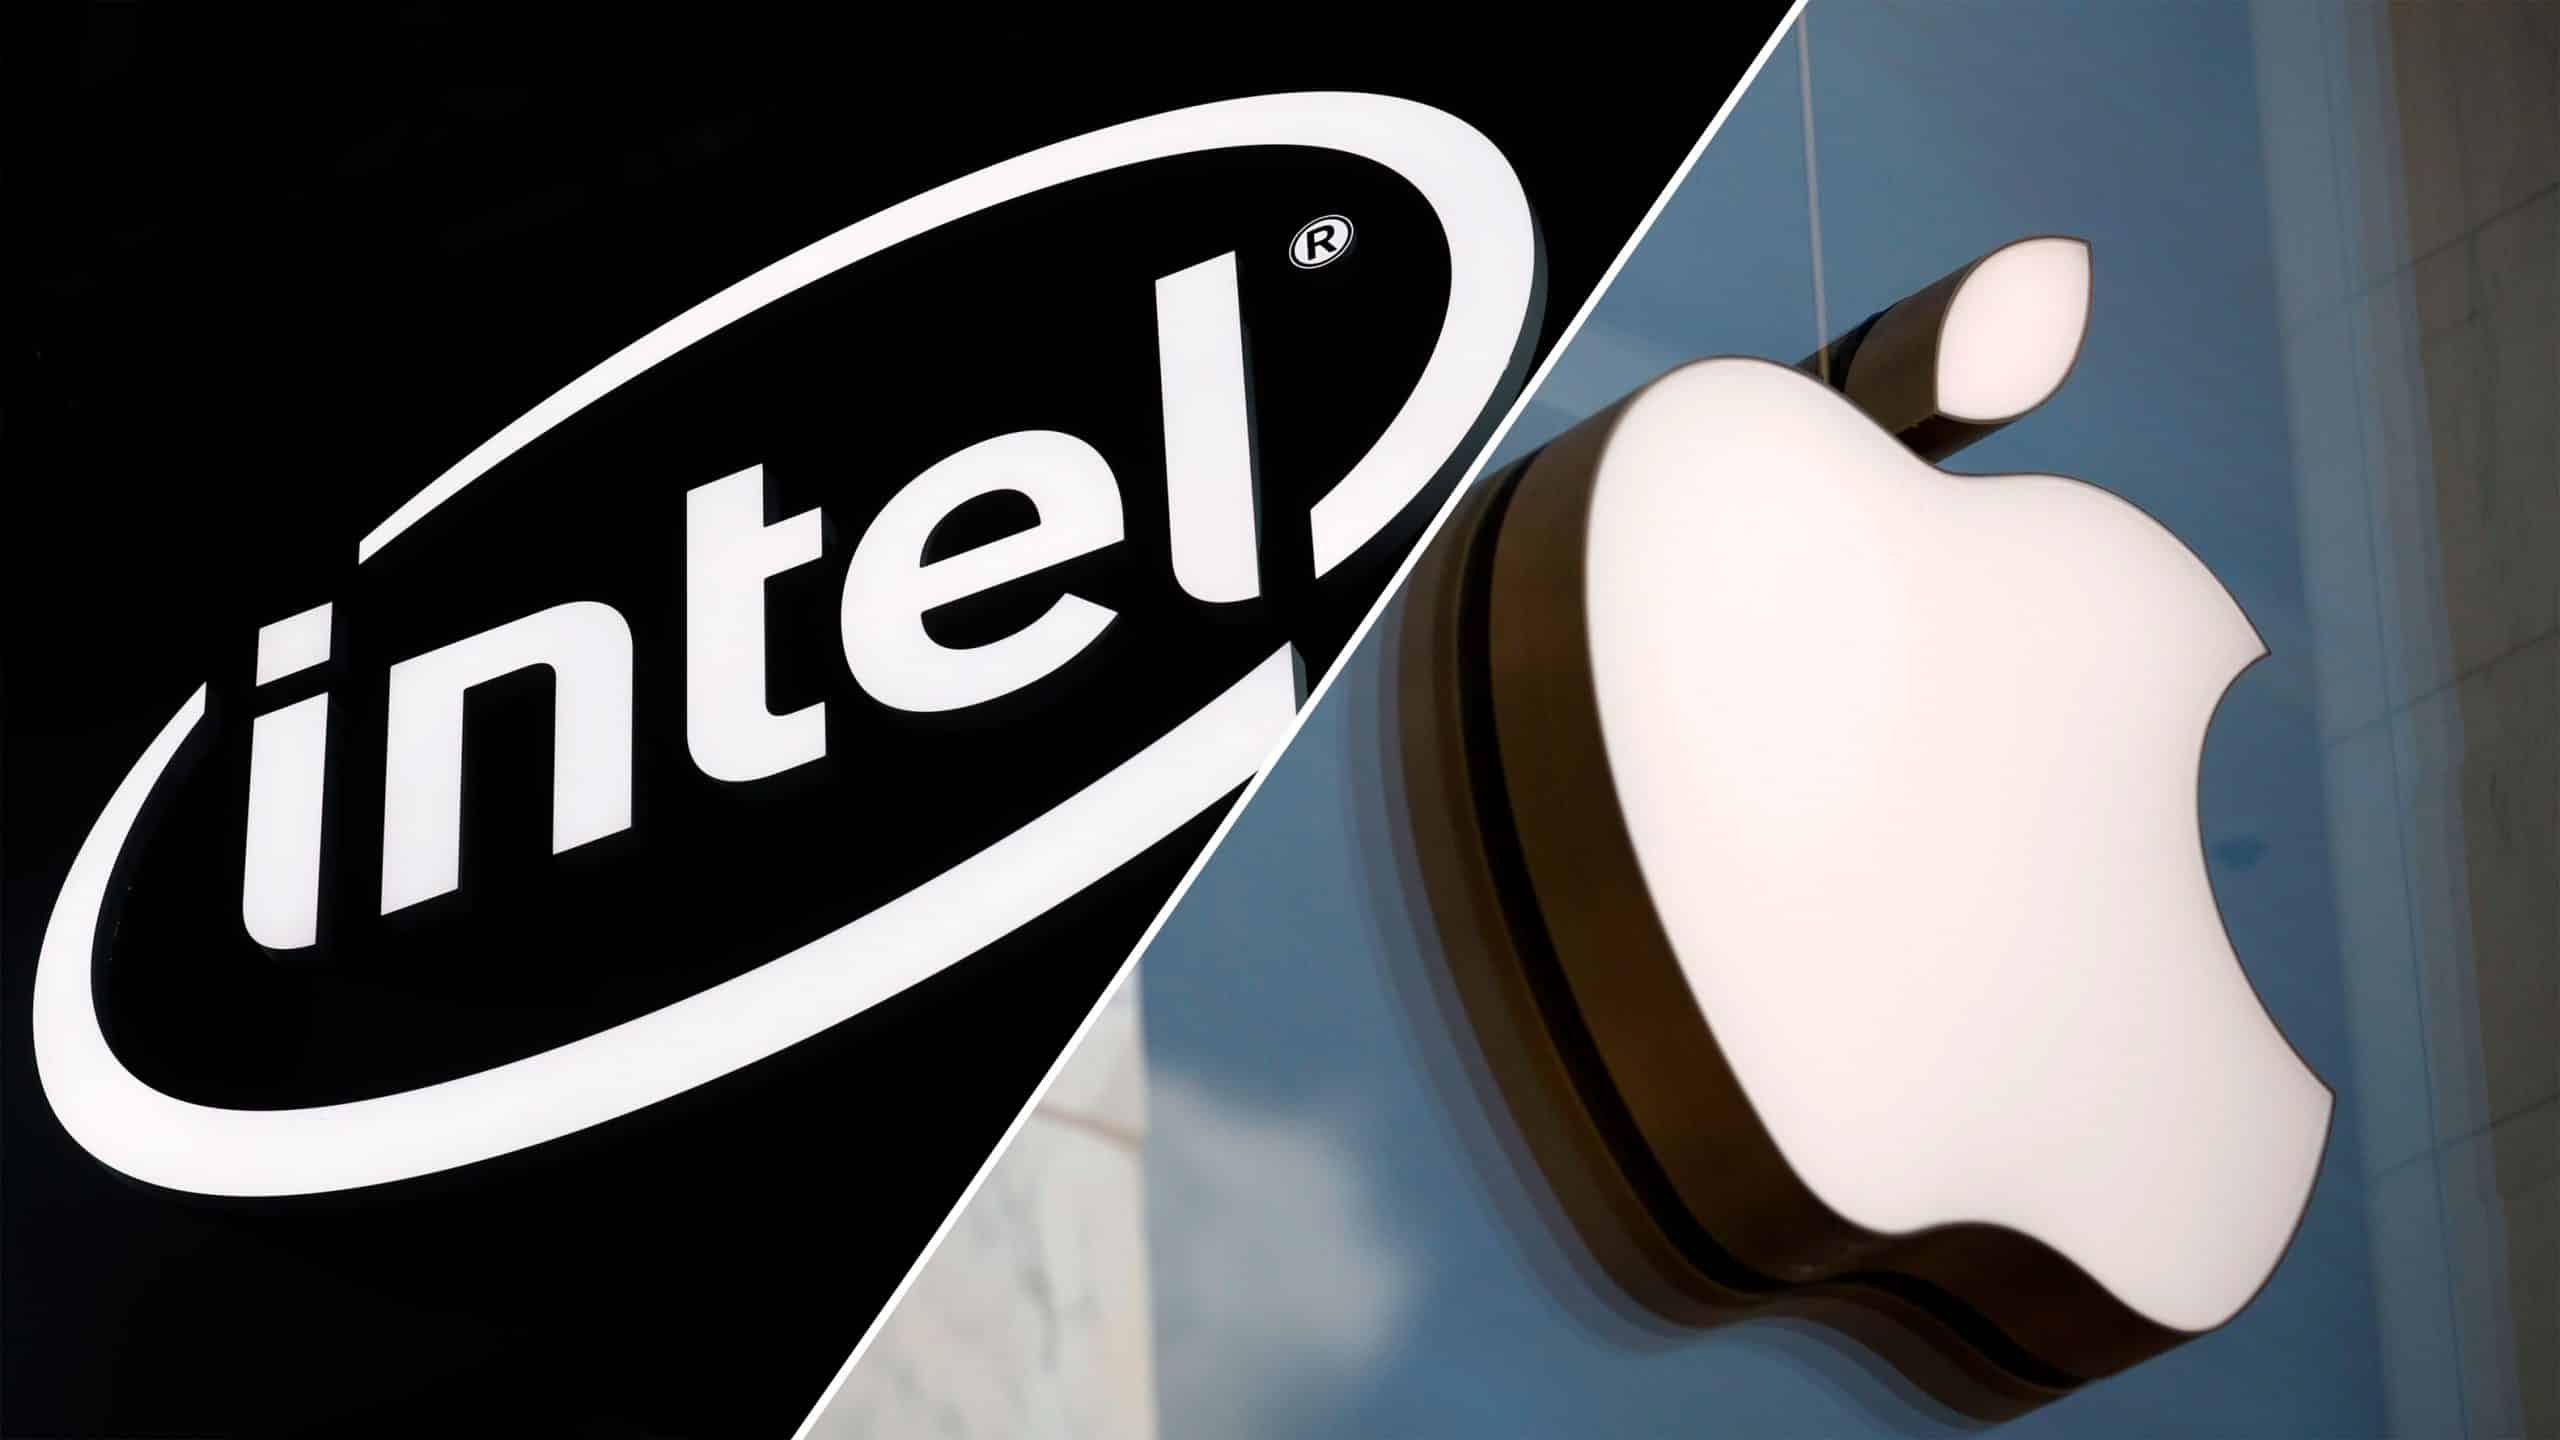 Apple aims to move away from Intel